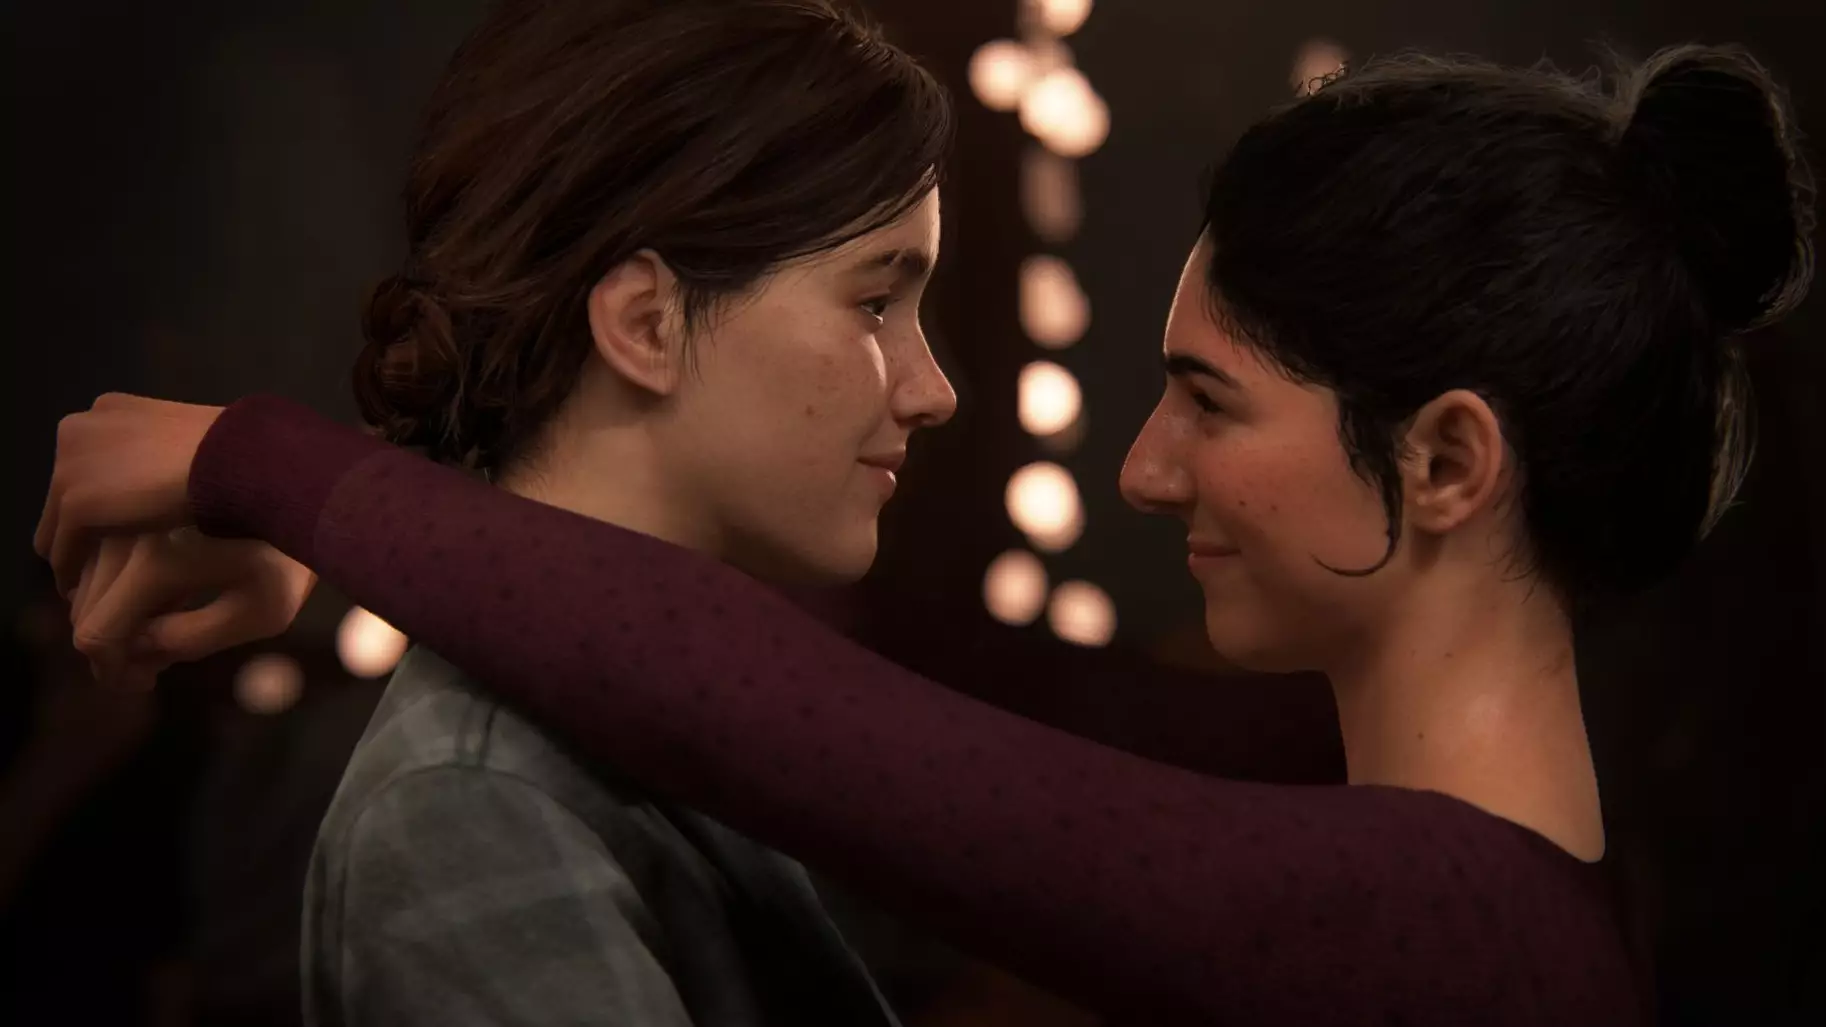 The Last Of Us Part 2 will be released on June 19th.